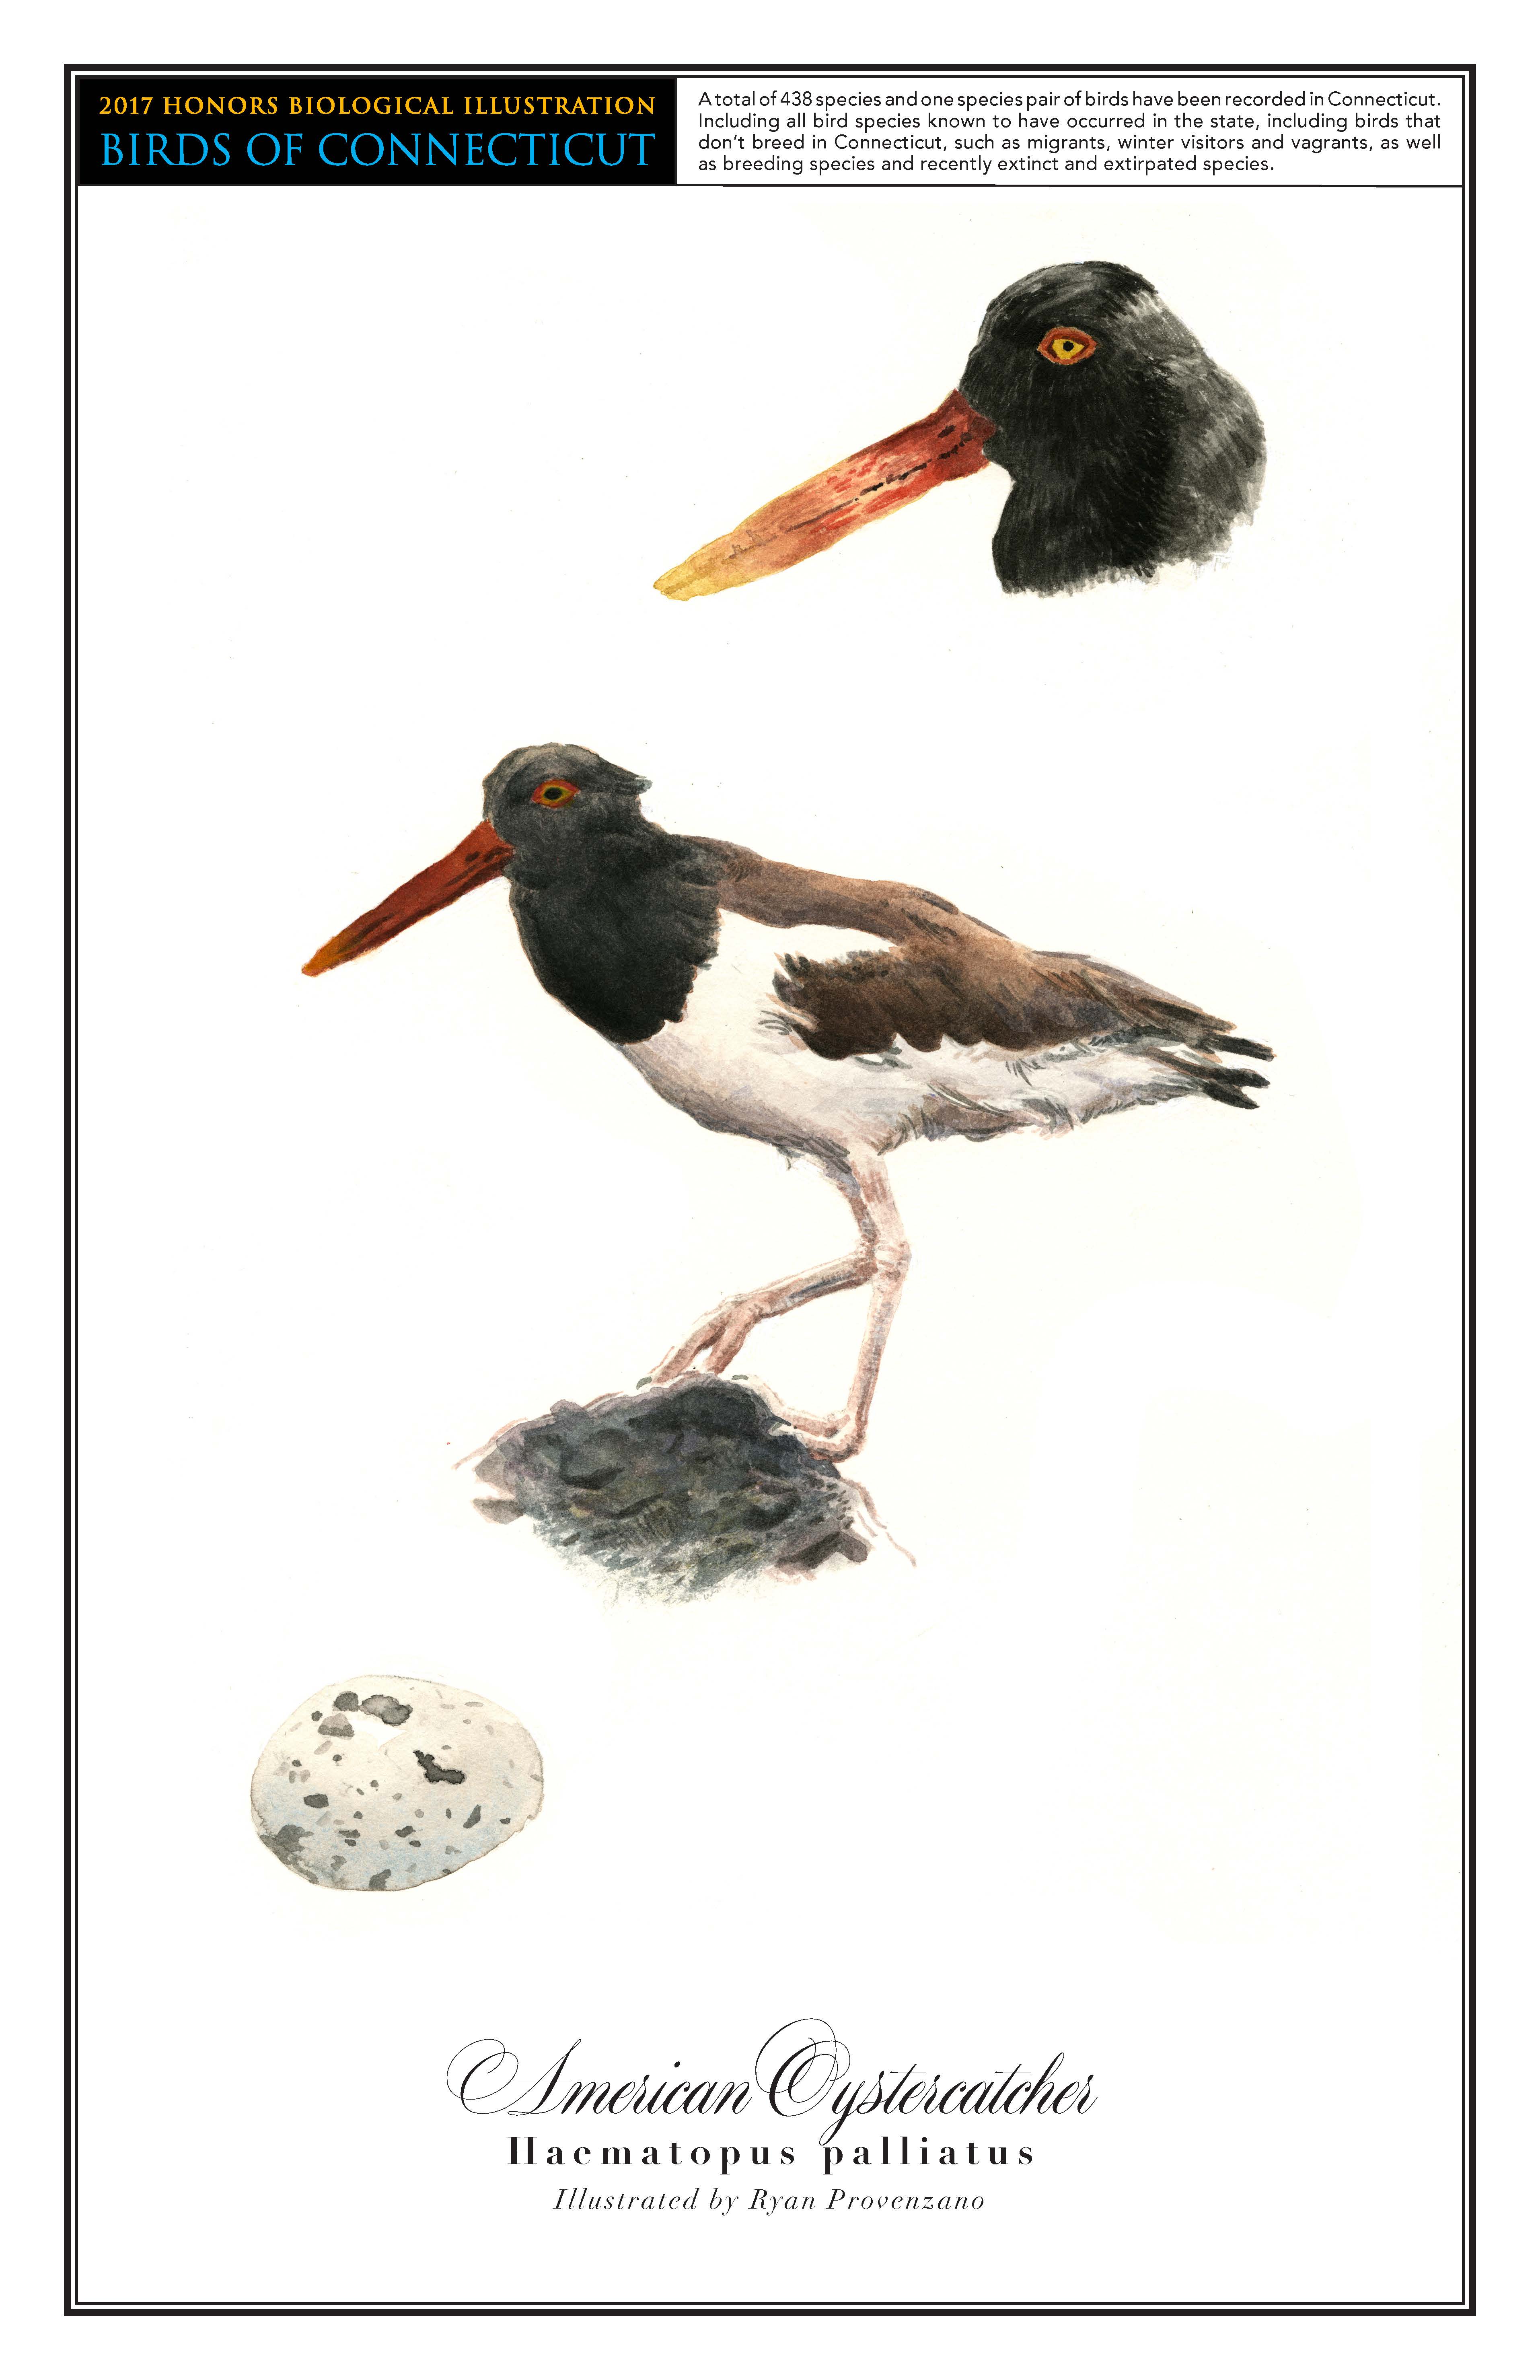 The American oystercatcher has a black head, a brown back, and a white underbelly. A drawing of it standing on a rock is in the center of the page. A close up drawing of its head is in the top right corner, and a drawing of its gray-speckled egg is in the bottom left.